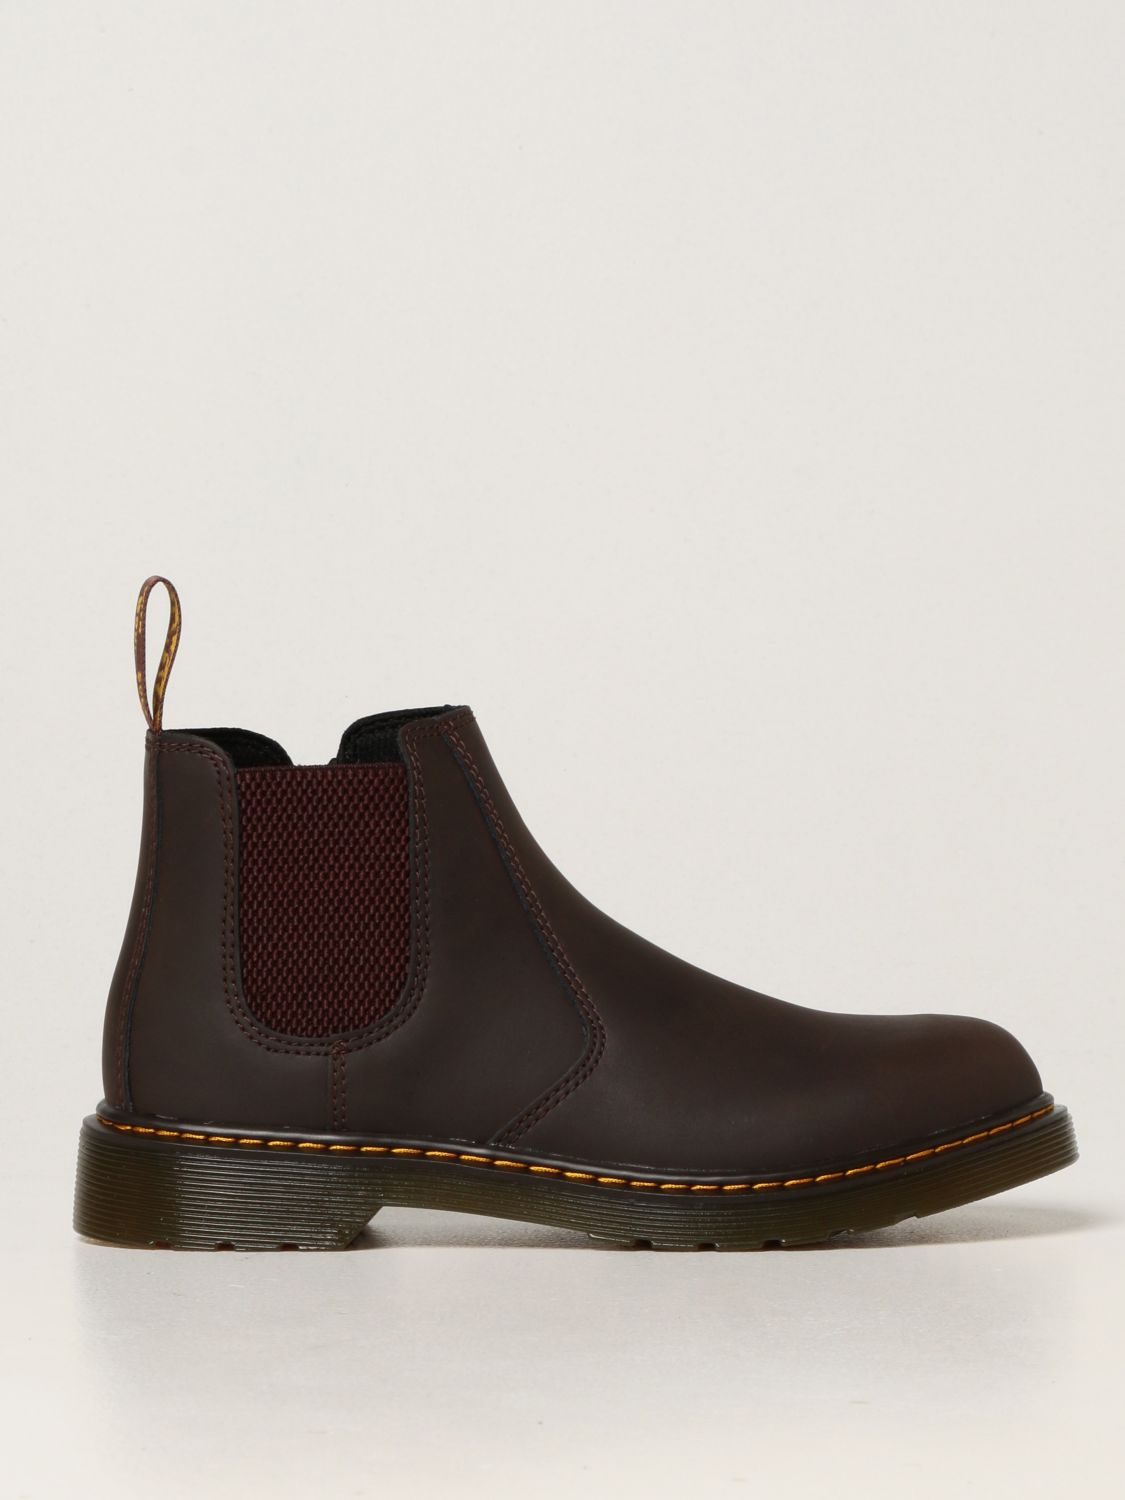 Bryggeri flaskehals Bore DR. MARTENS: 2976 Y Chelsea boots in leather | Shoes Dr. Martens Kids Brown  | Shoes Dr. Martens 25854207 GIGLIO.COM